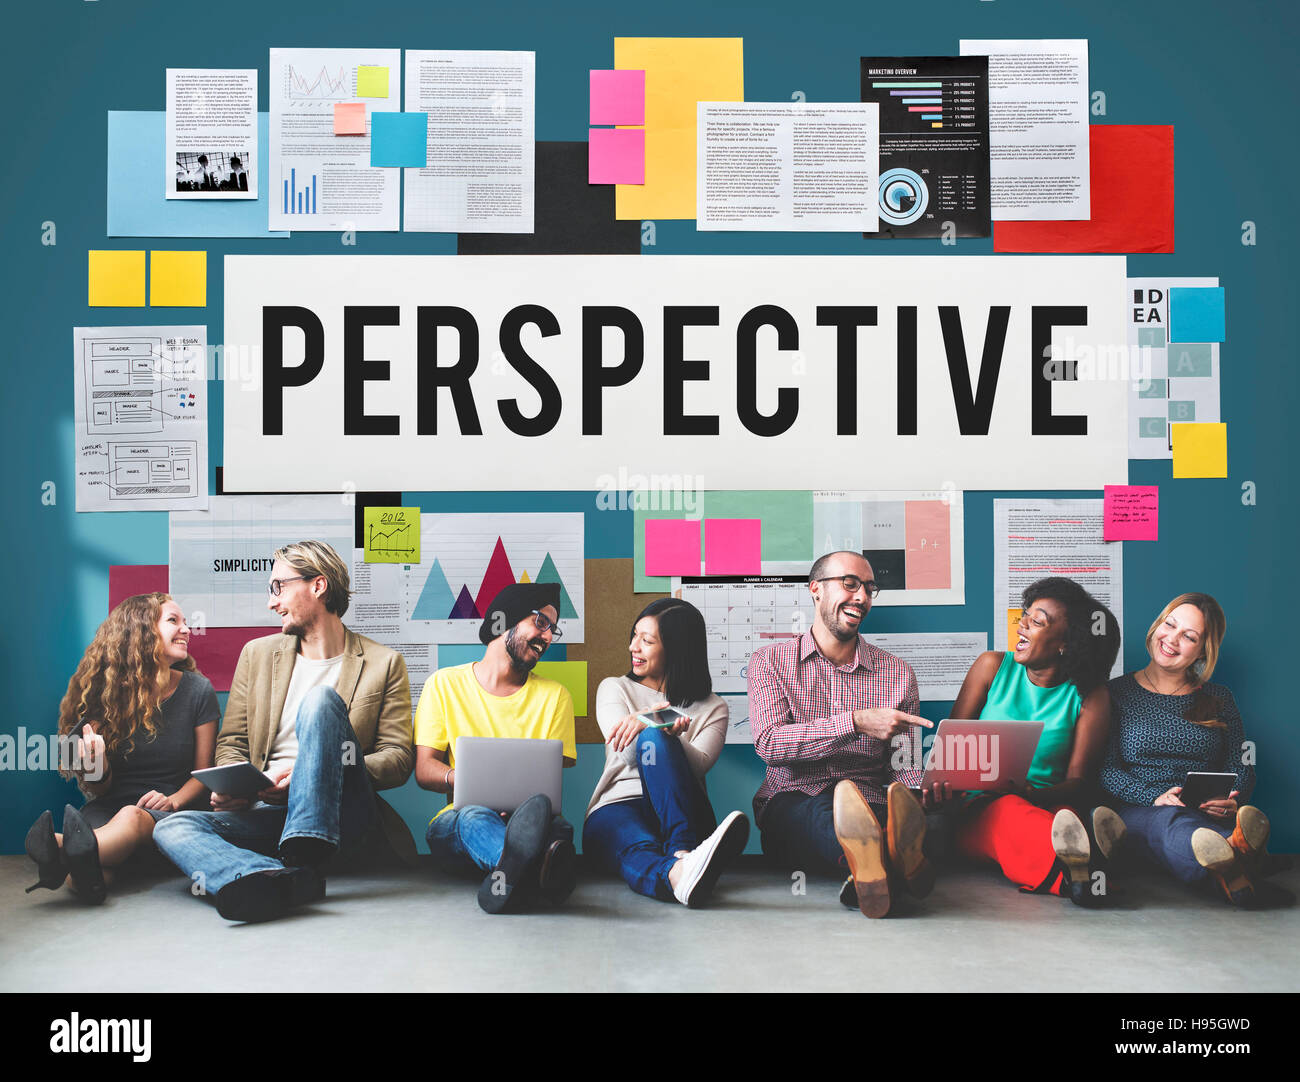 Perspective Attitude Position Standpoint View Concept Stock Photo